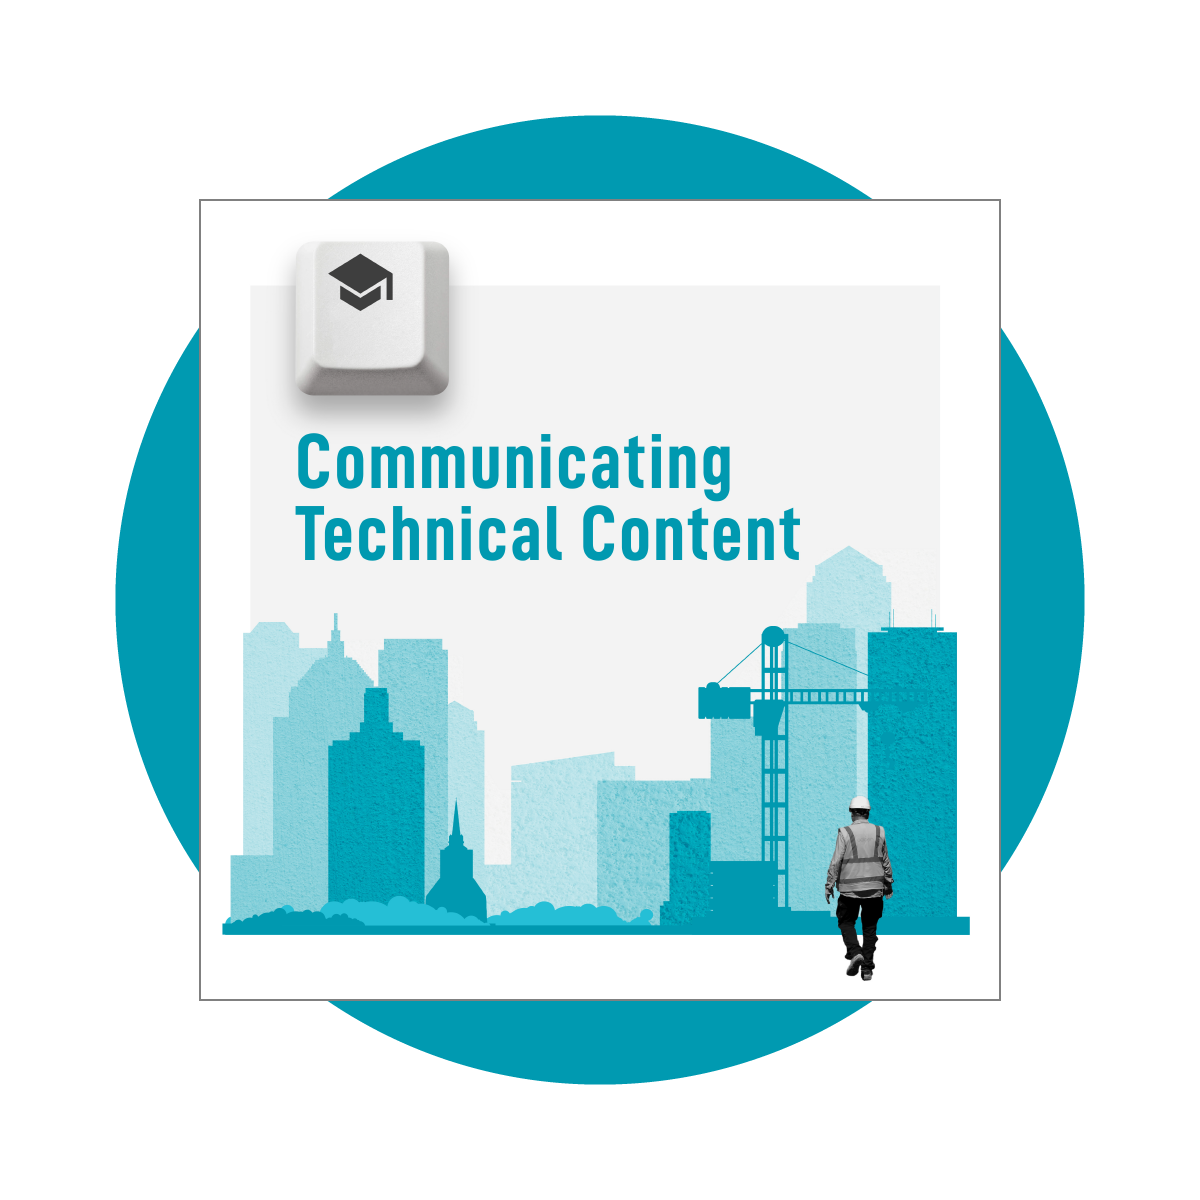 The course page for Communicating Technical Content.